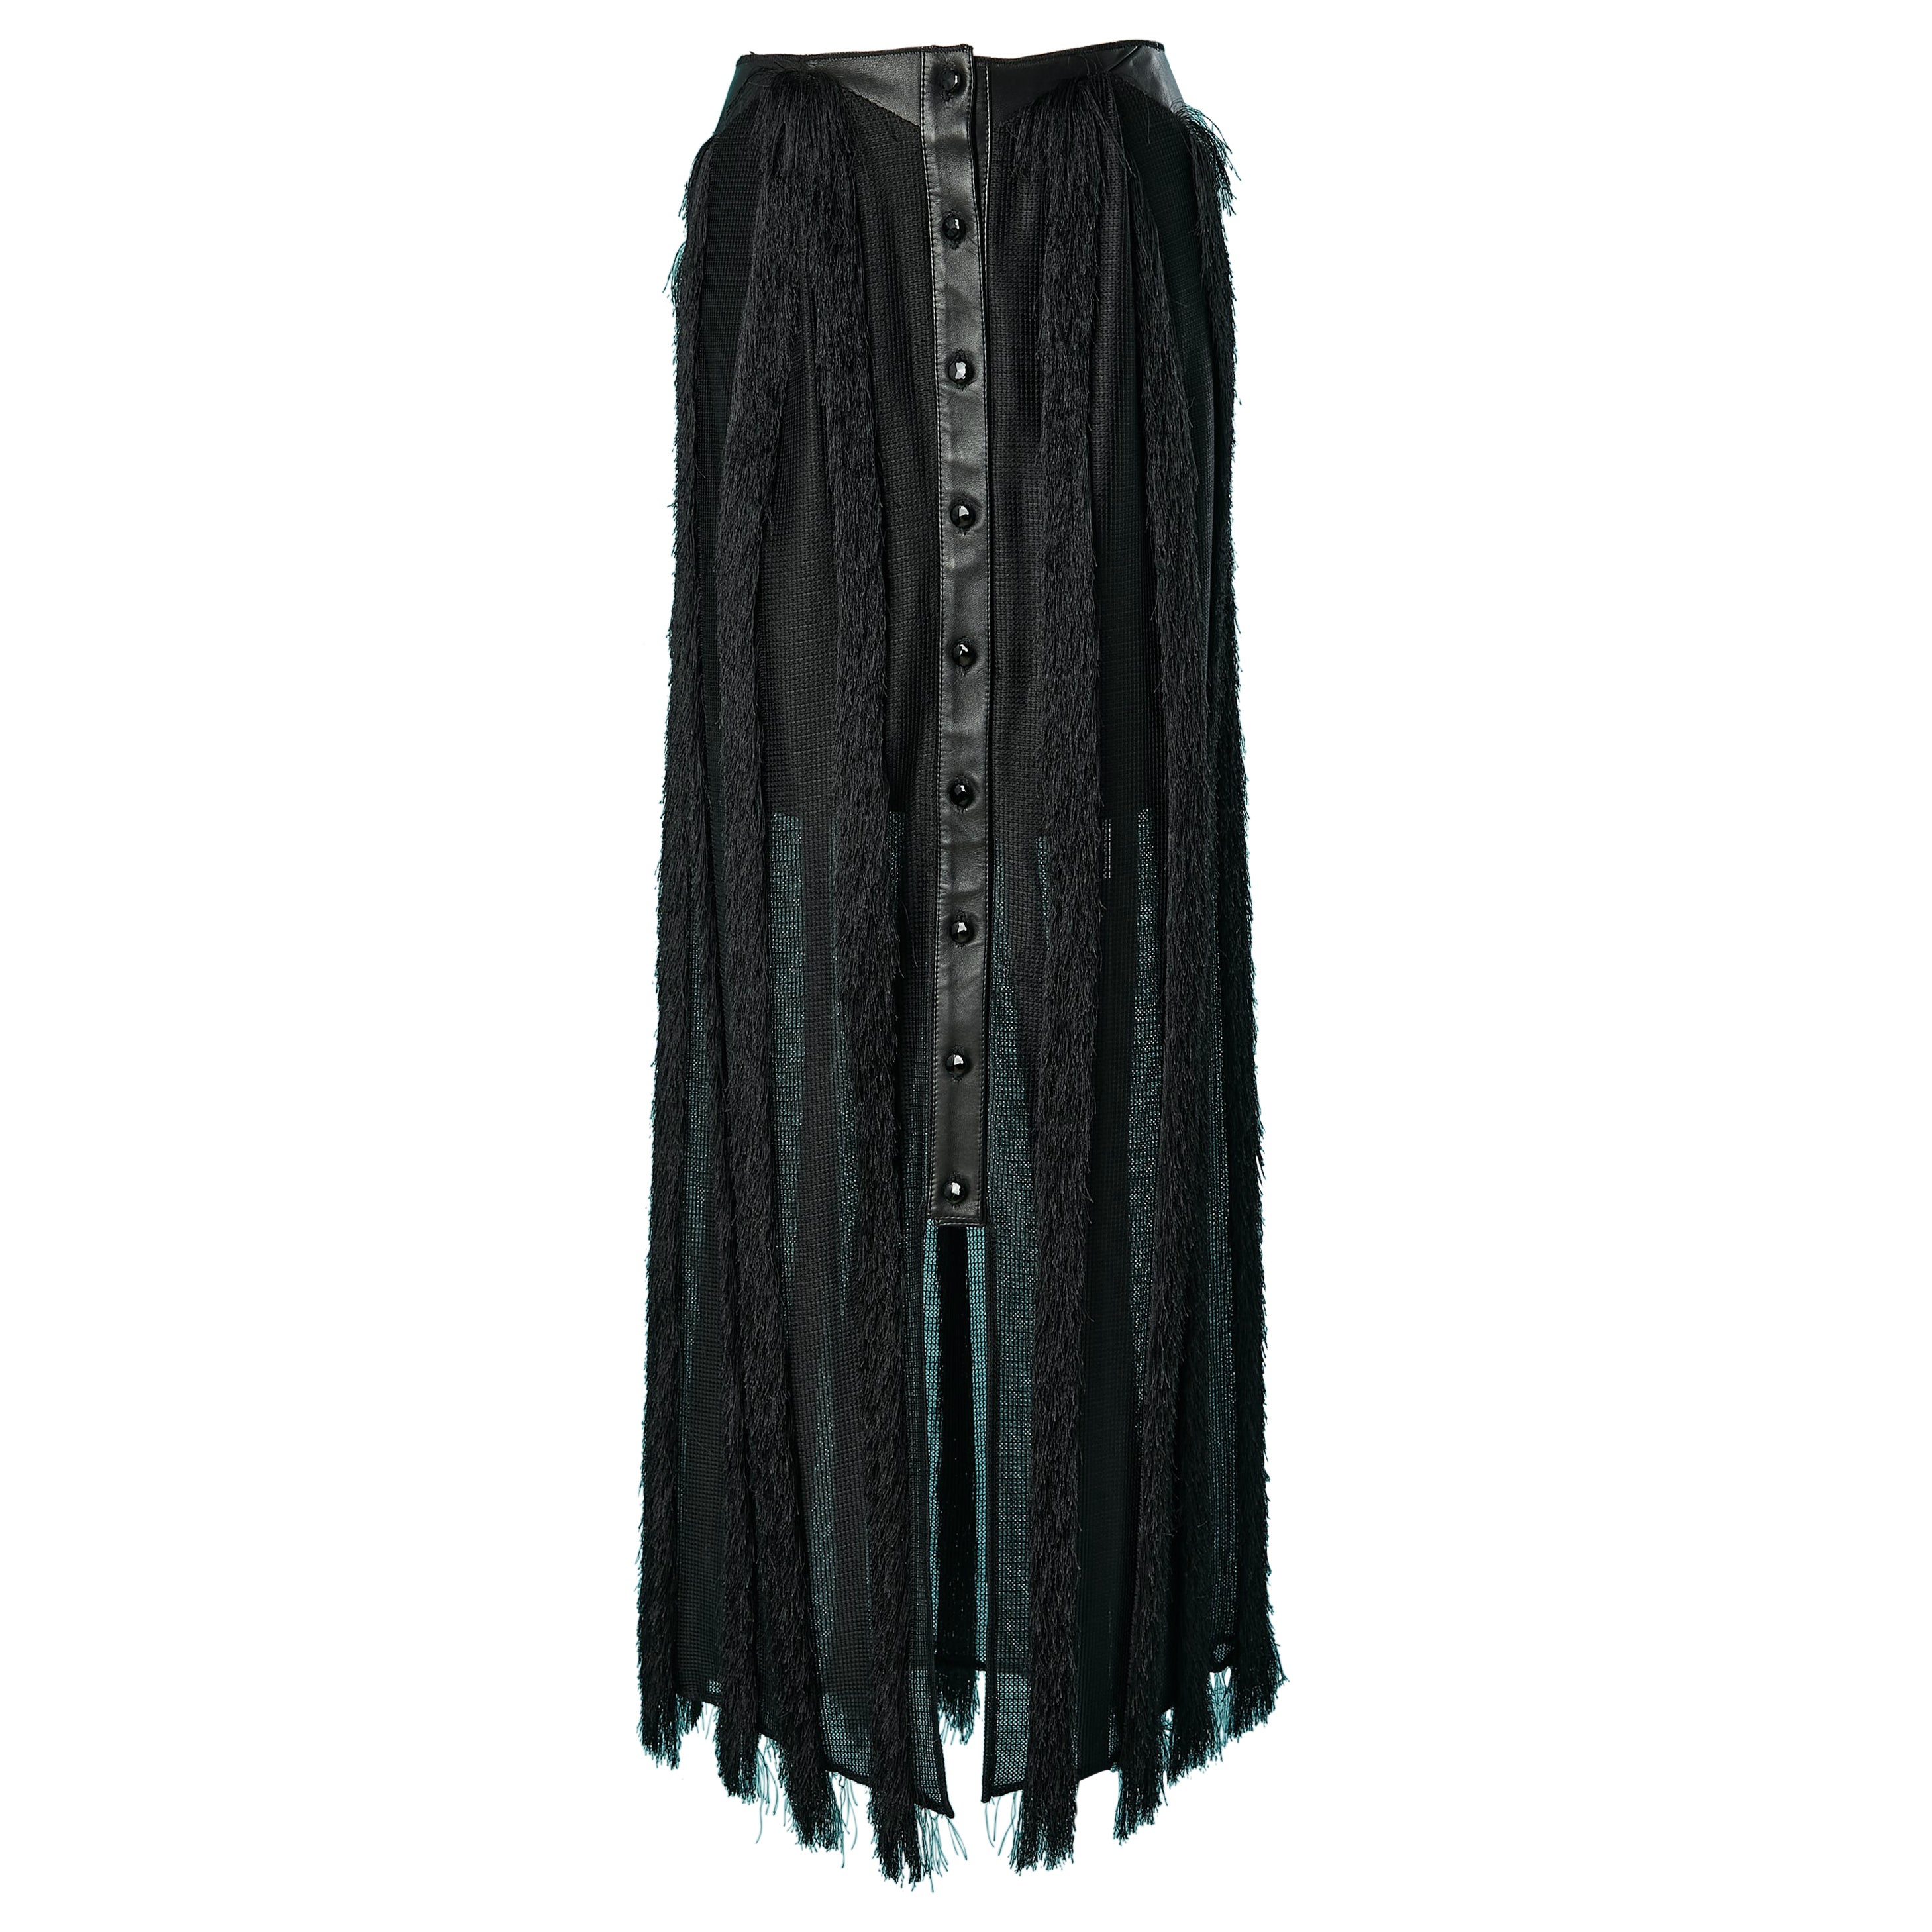 Black long skirt made of leather, soft tulle and threads fringes Augustin Teboul For Sale